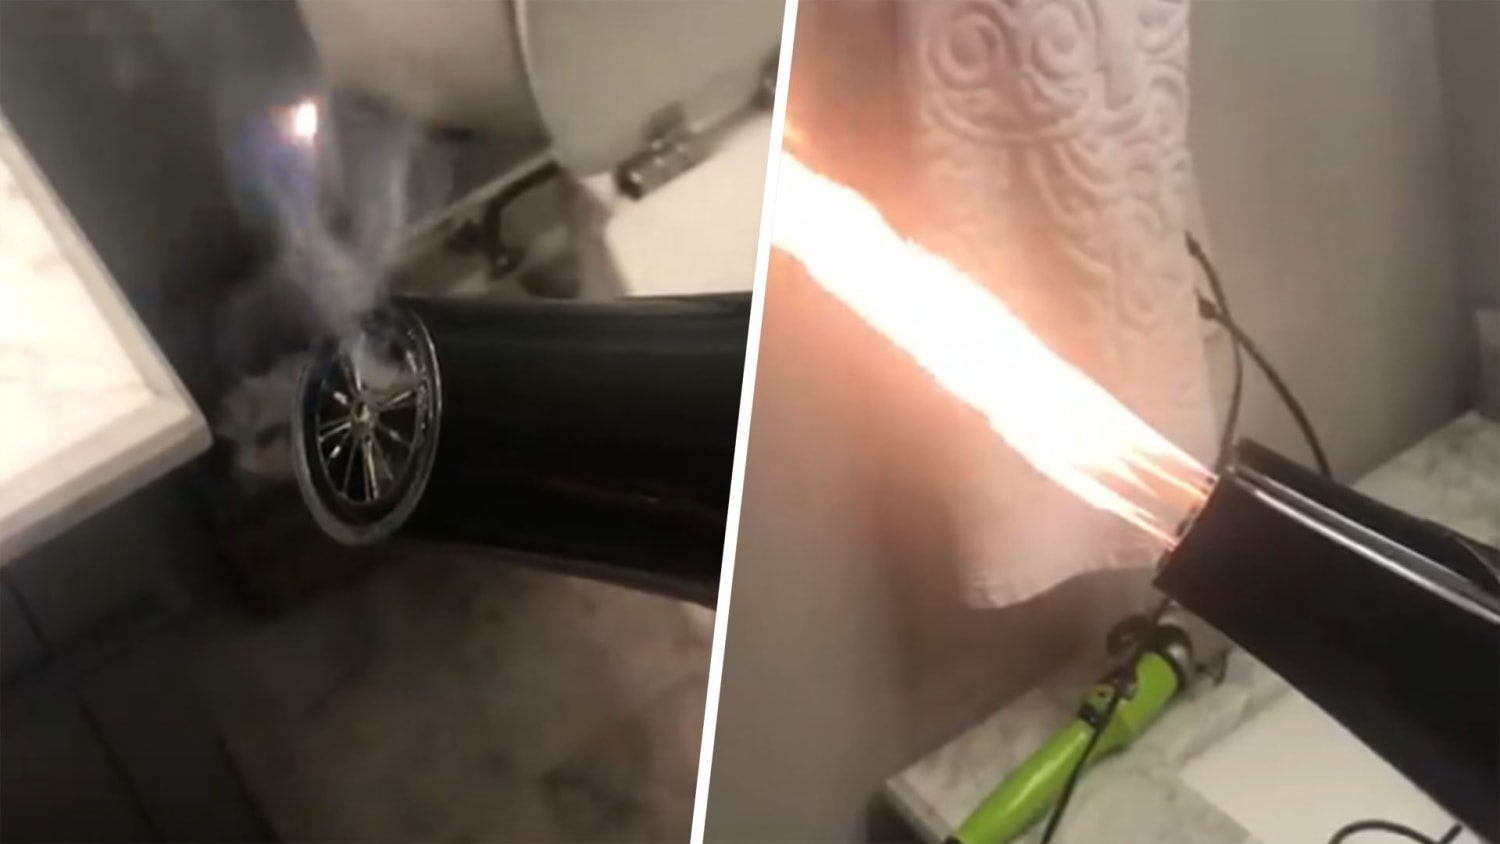 This woman's hair dryer caught fire in viral Facebook video